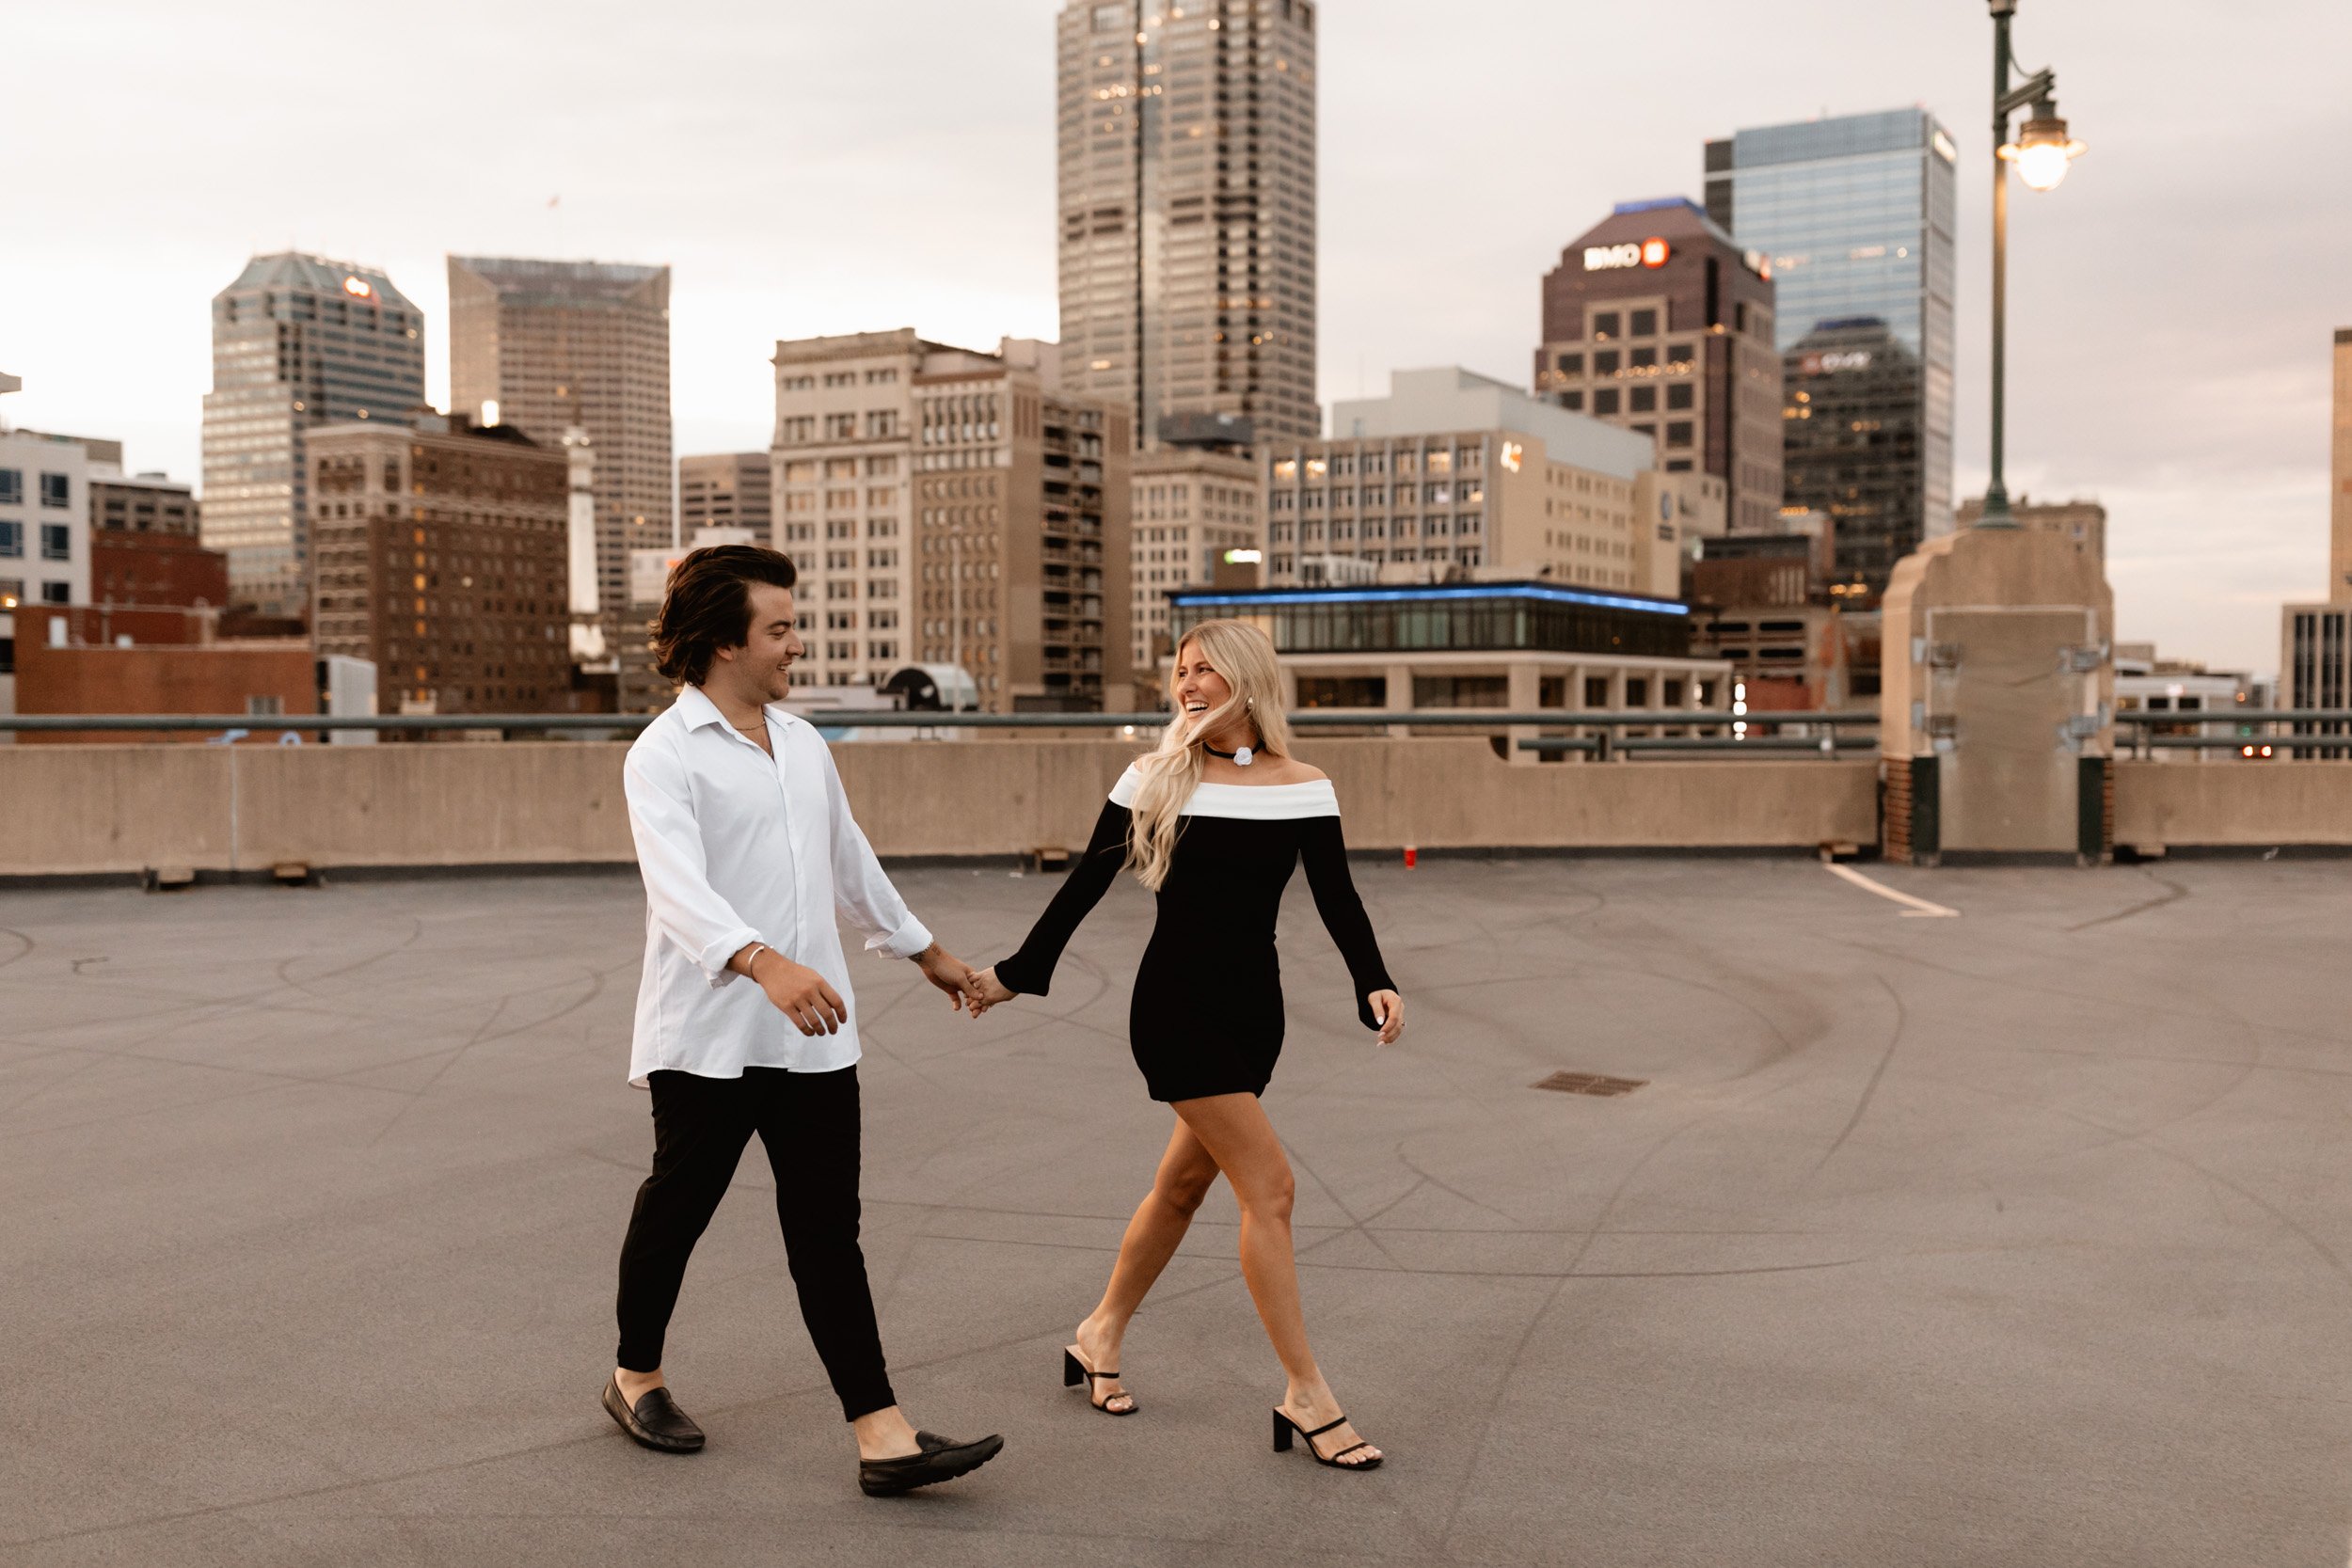 downtown-indianapolis-engagement-shoot-31.jpg